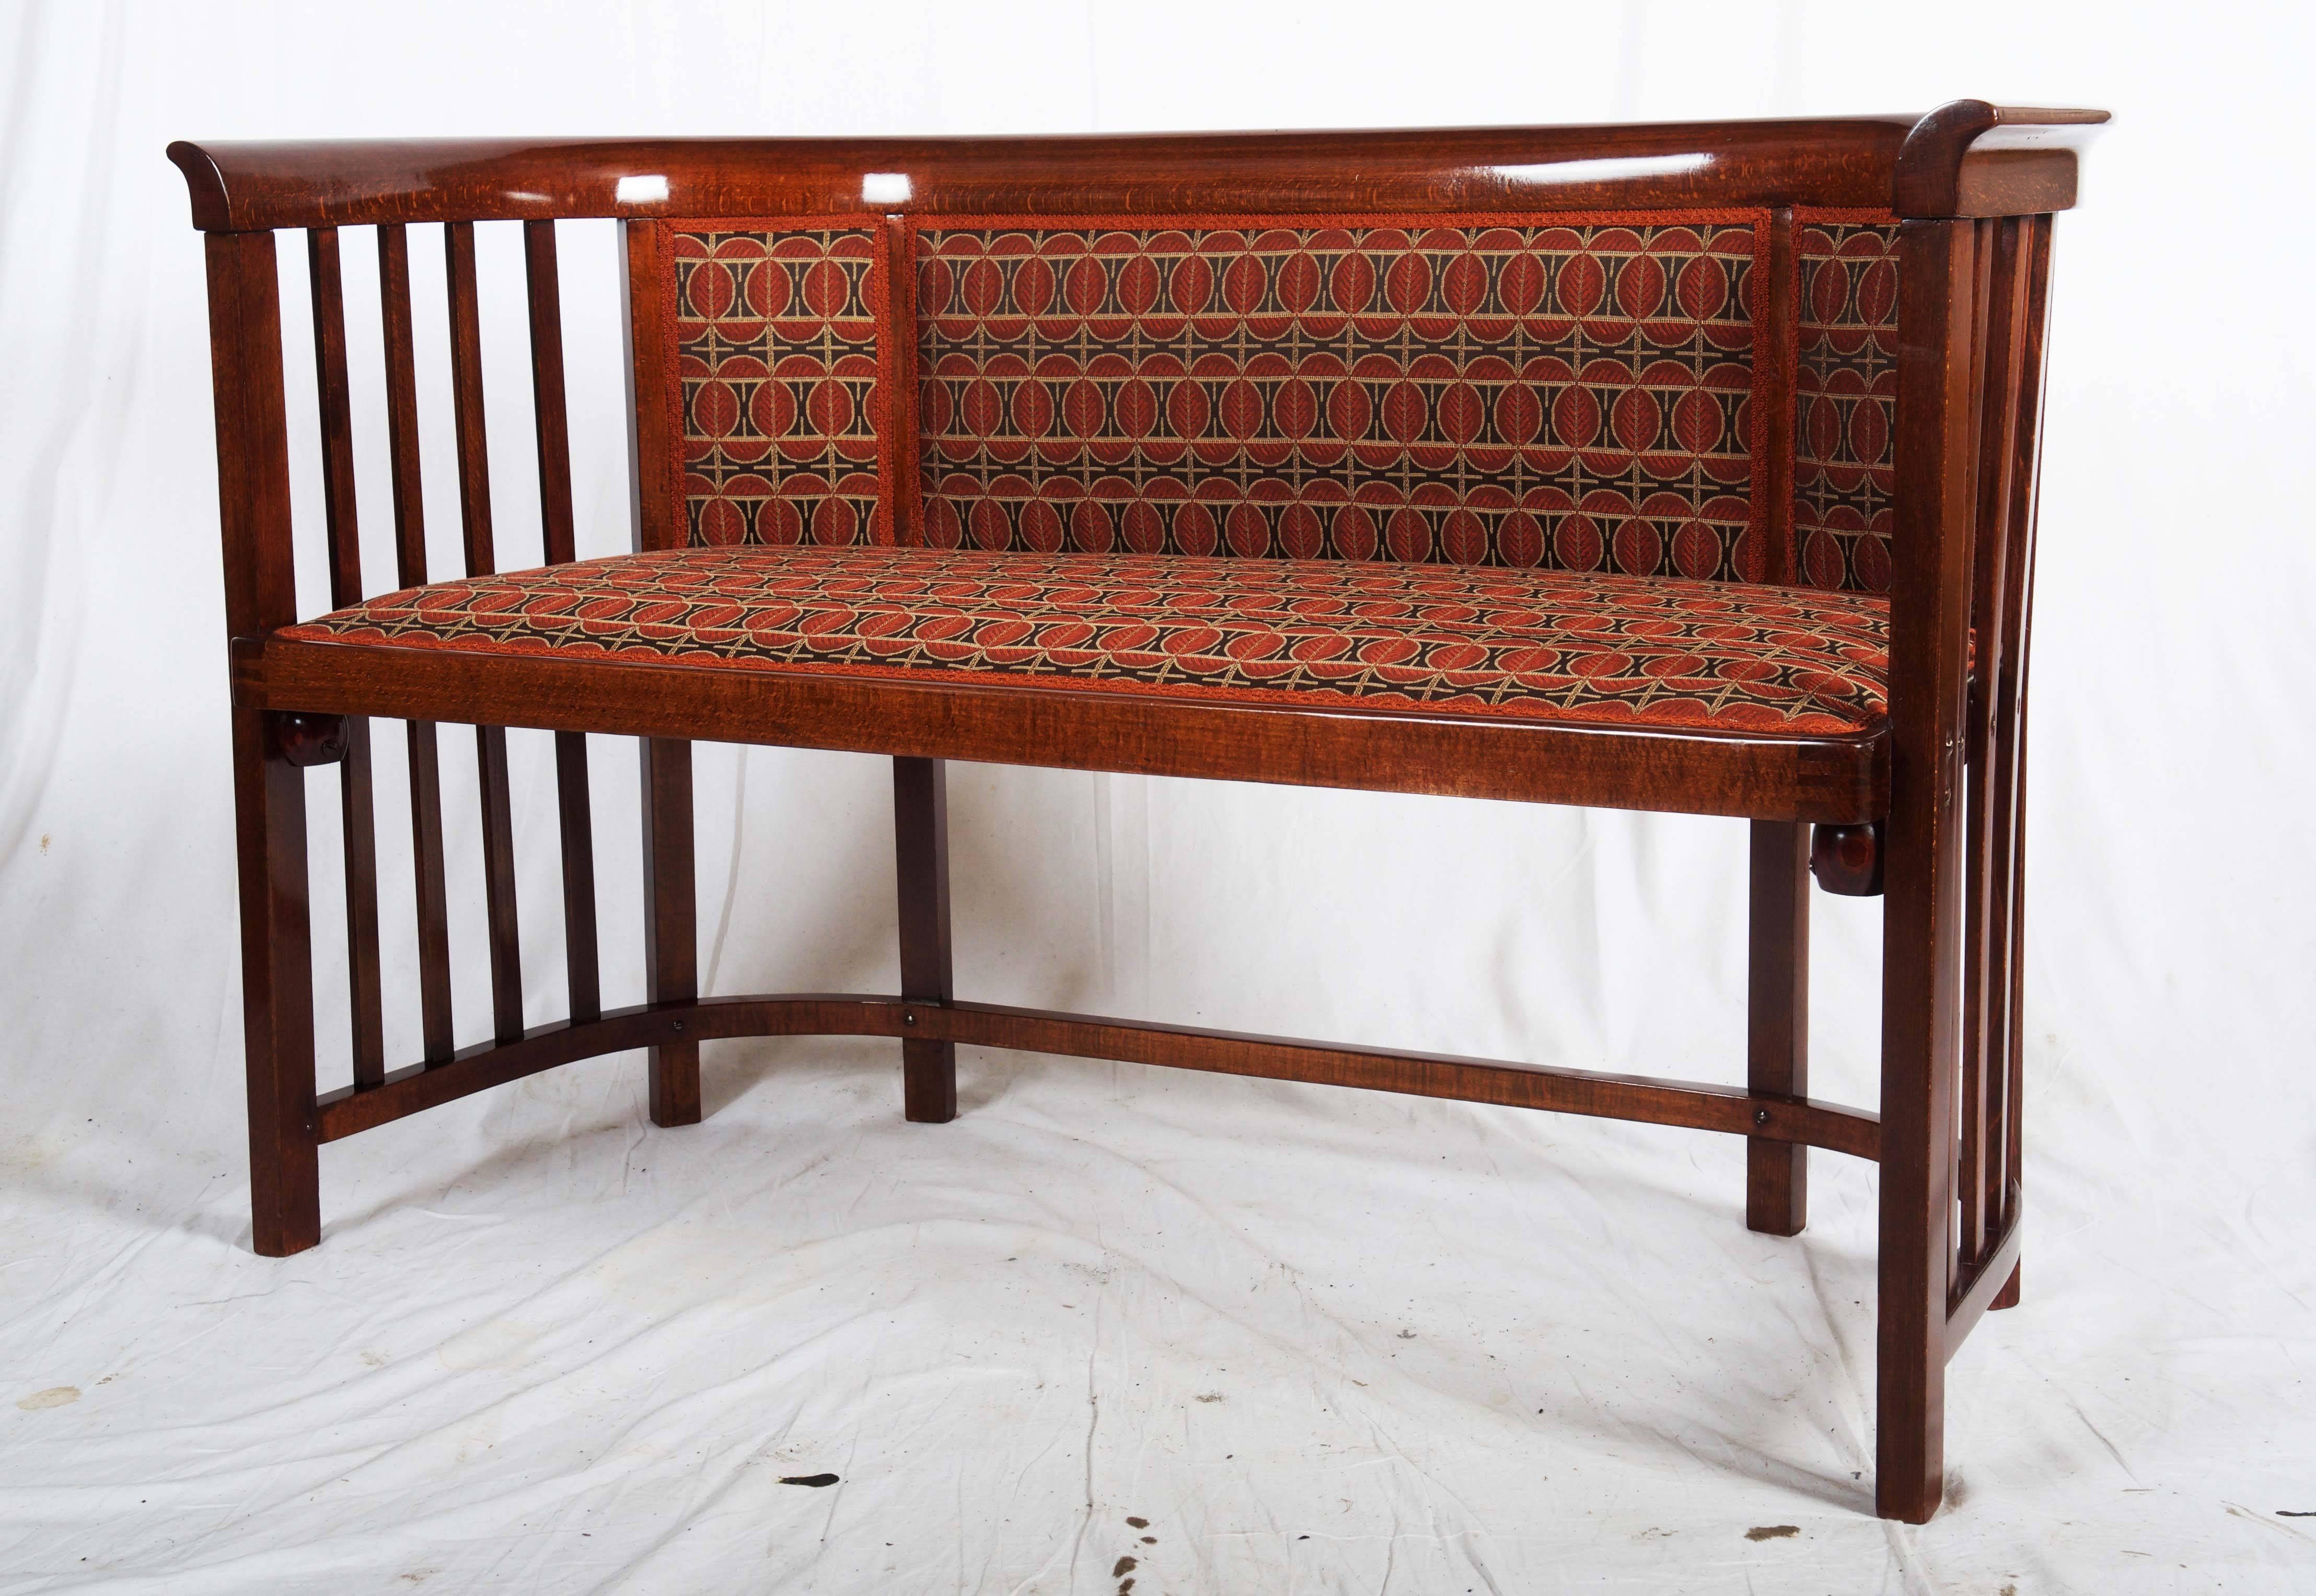 Beech bent wood bench manufactured by: Jacob & Josef Kohn, or Thonet Vienna (model NR. 423 F/ C) (the manufacturer label is missing). 
Mahagony coloured stained, seat and backrest padded. 

There are two more benches available but still not